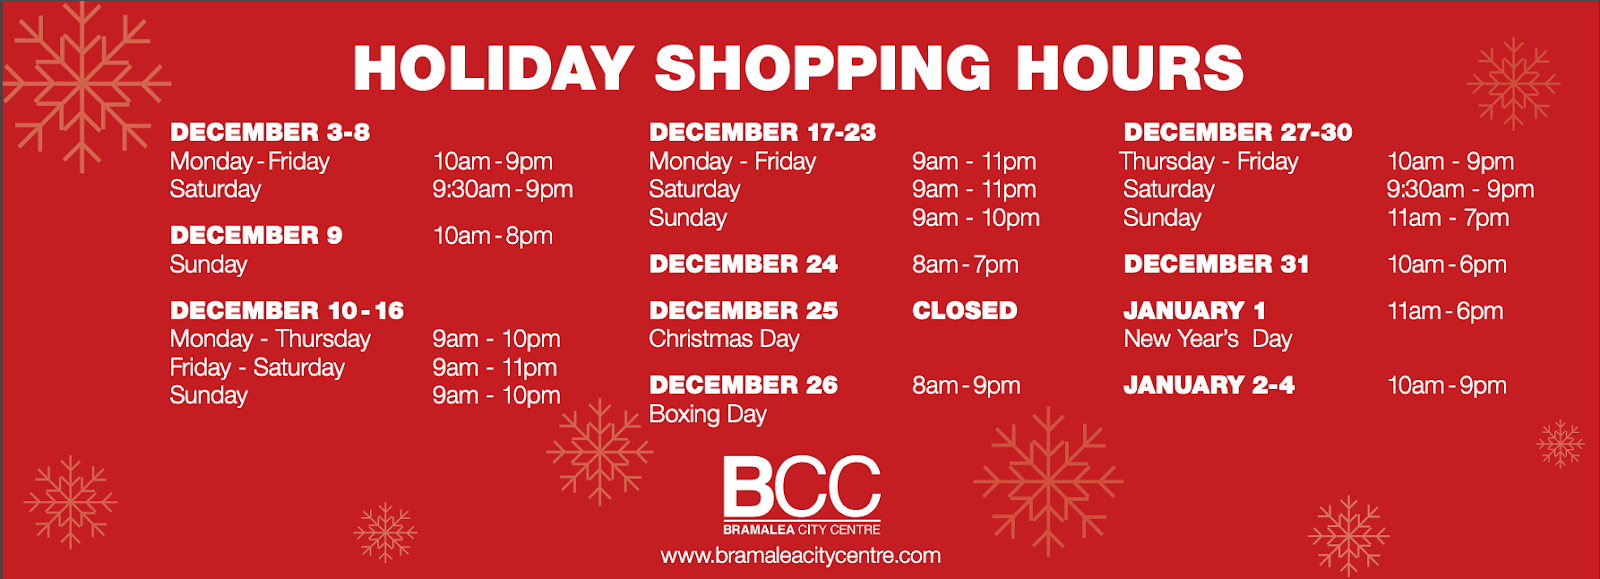 BCC’s Holiday Hours